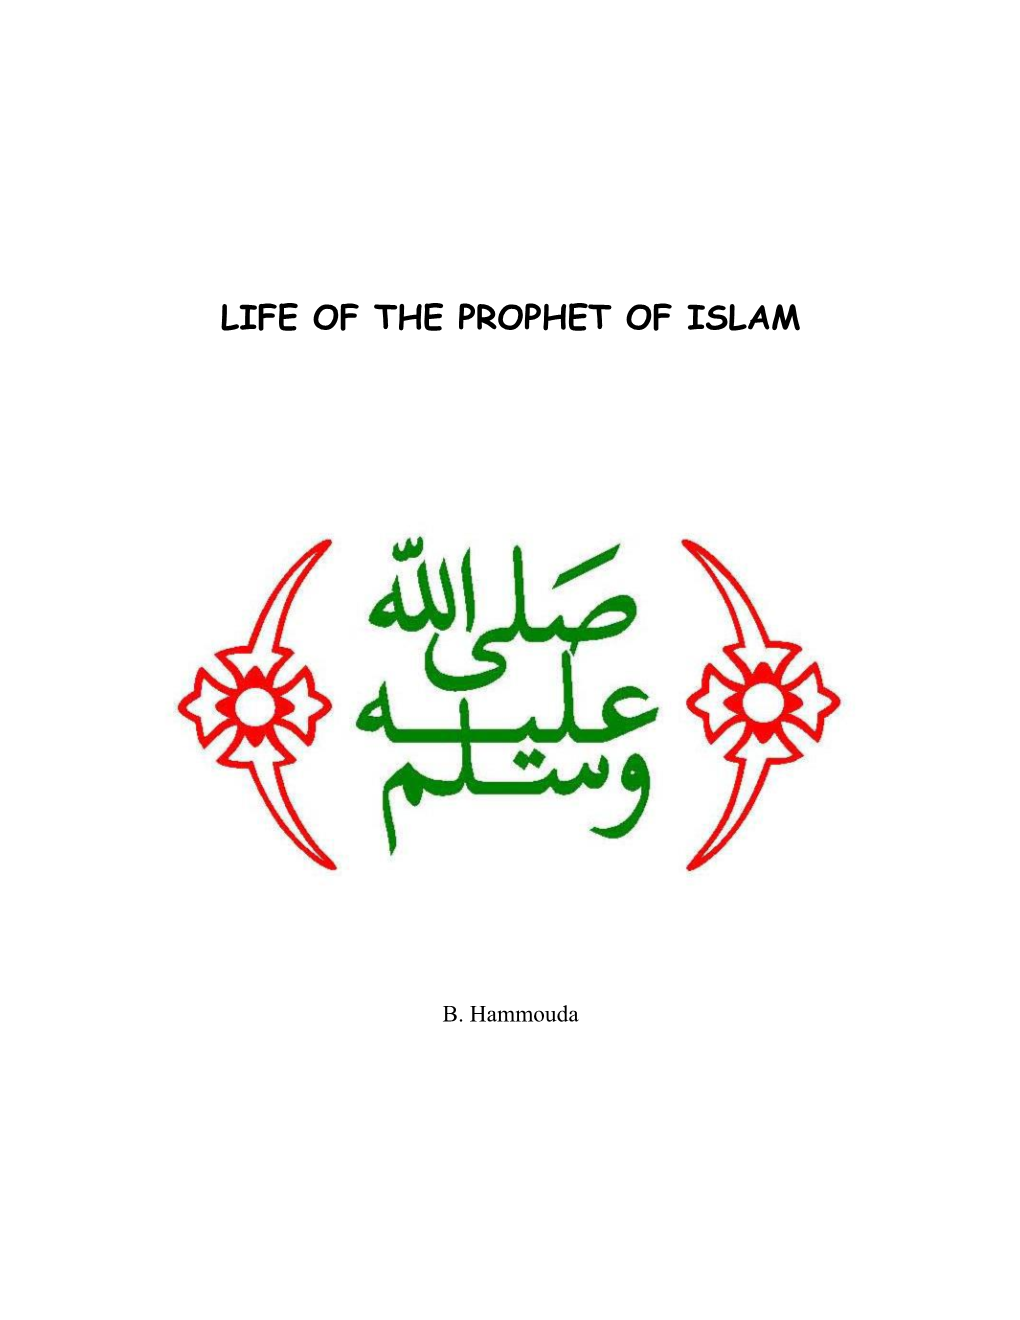 Life of the Prophet of Islam